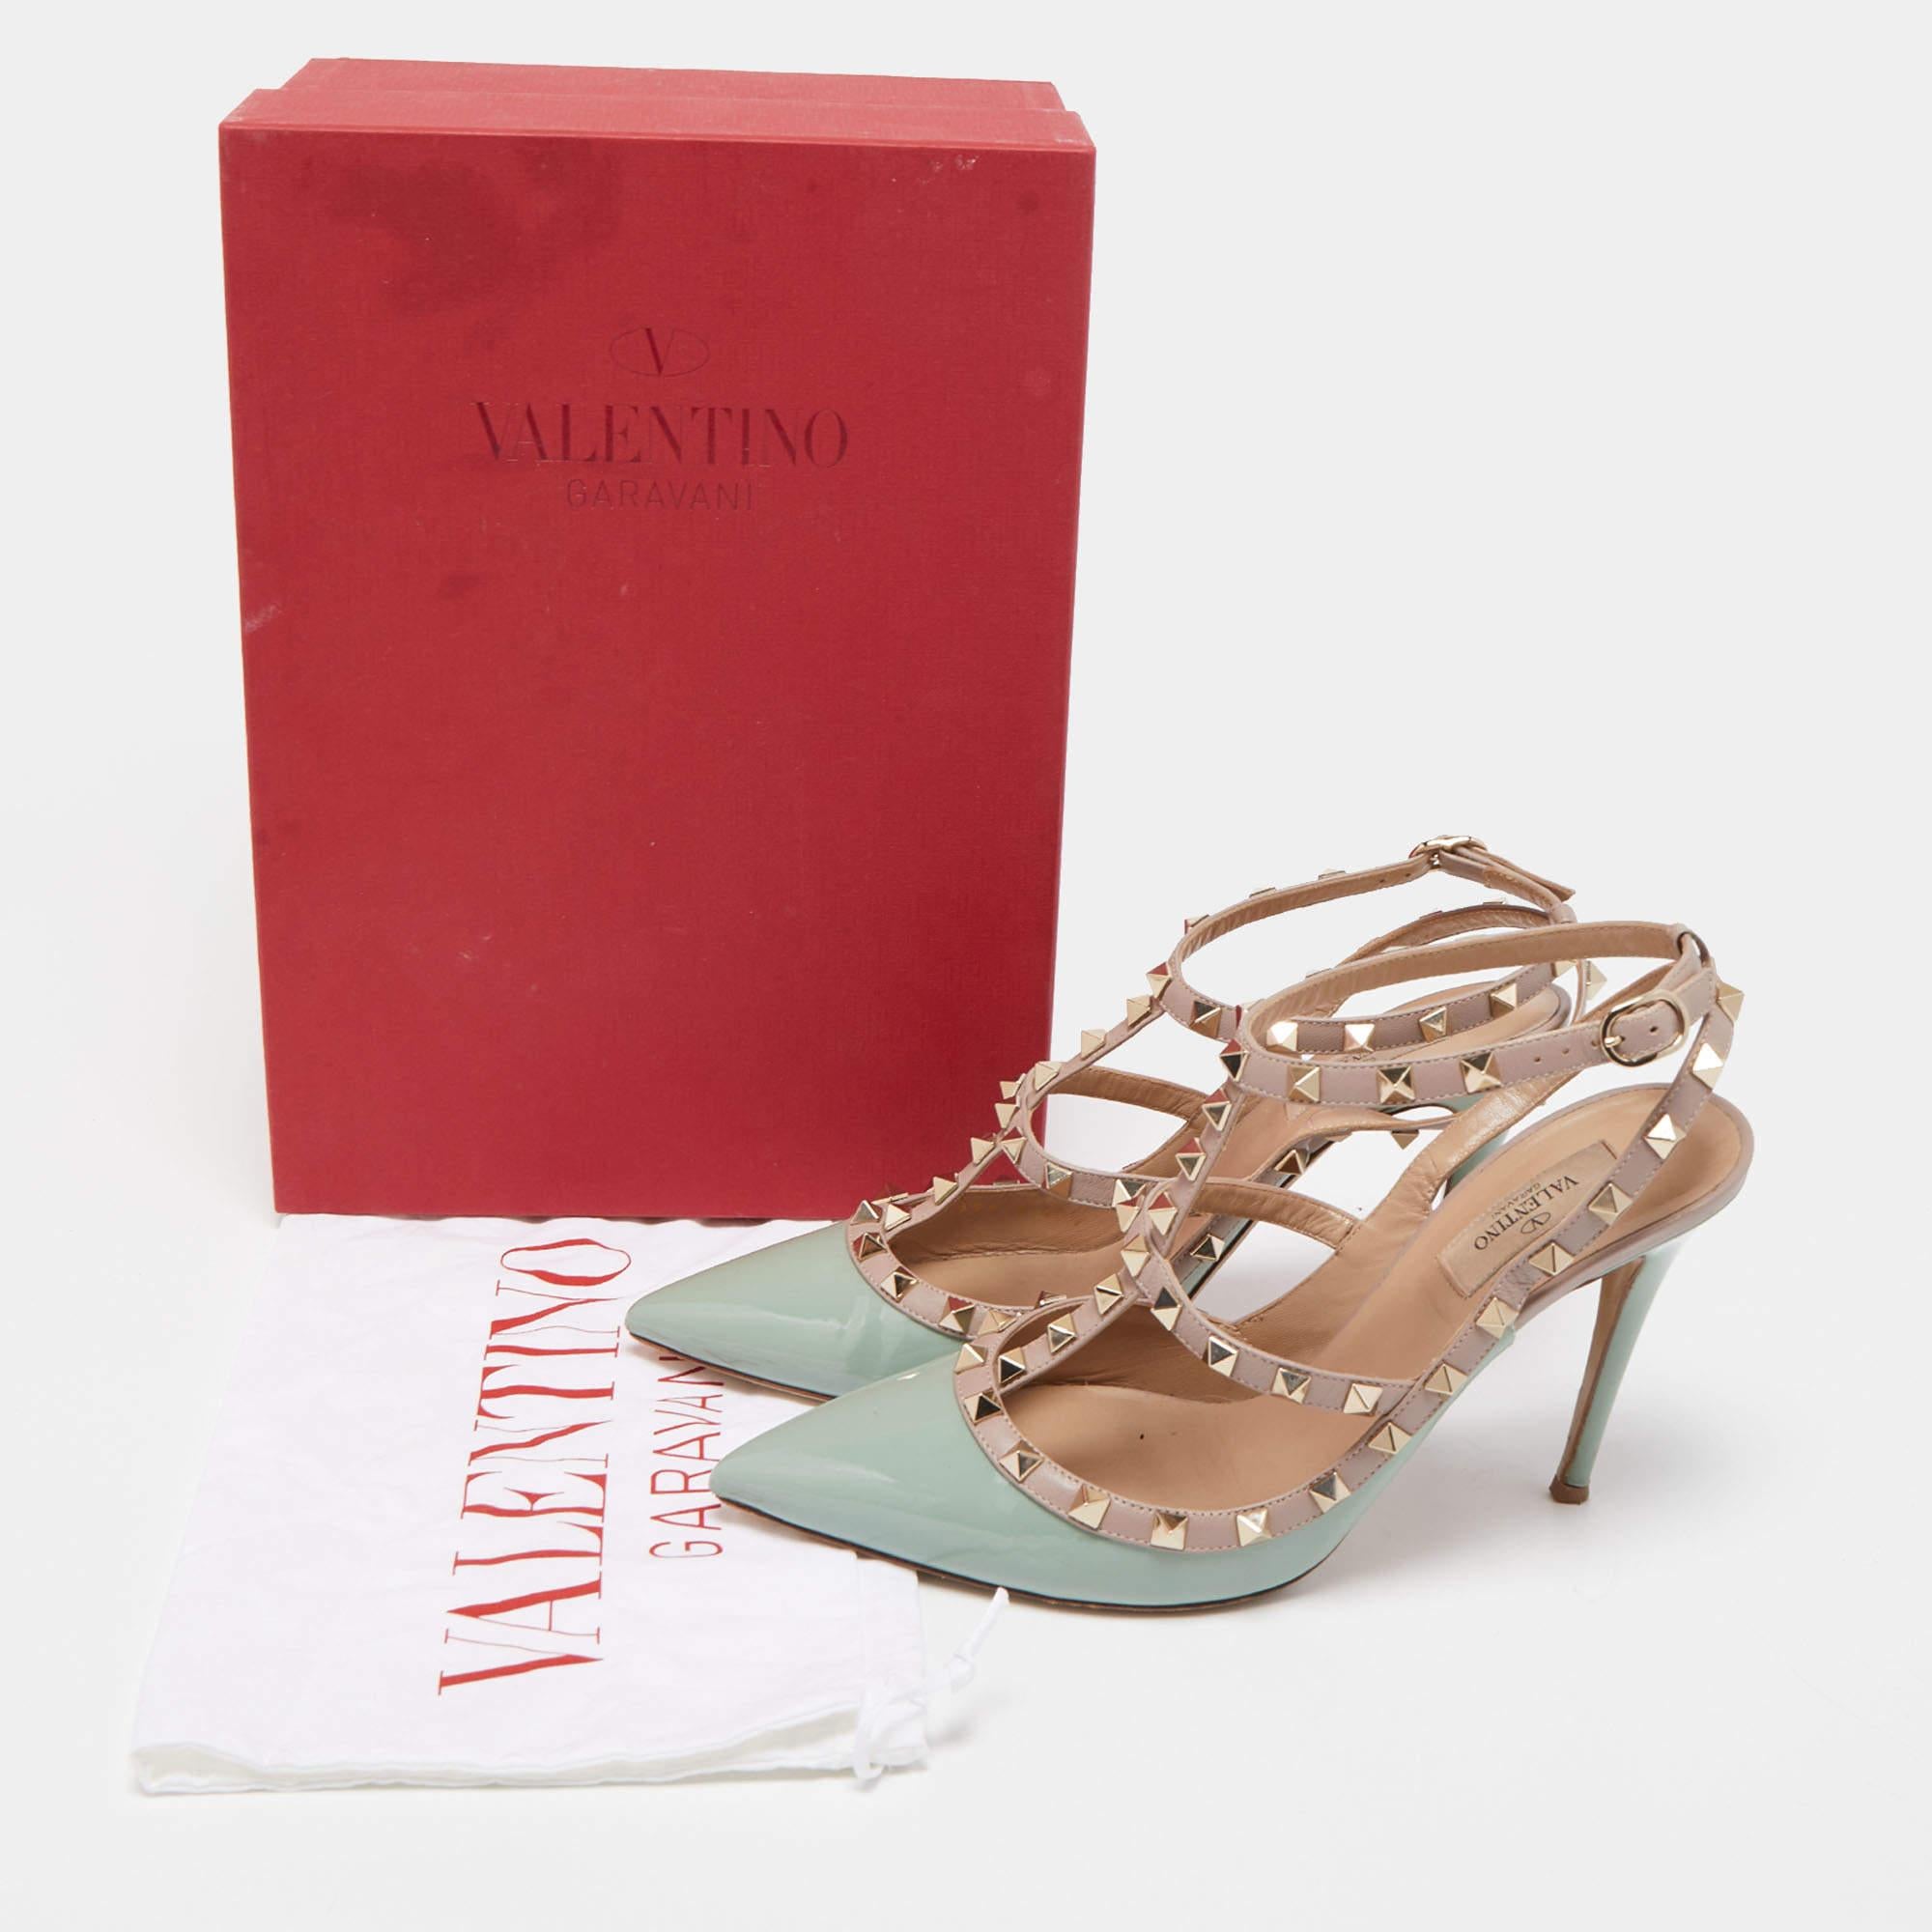 Valentino Green/Beige Patent and Leather Rockstud Pumps Size 40.5 5